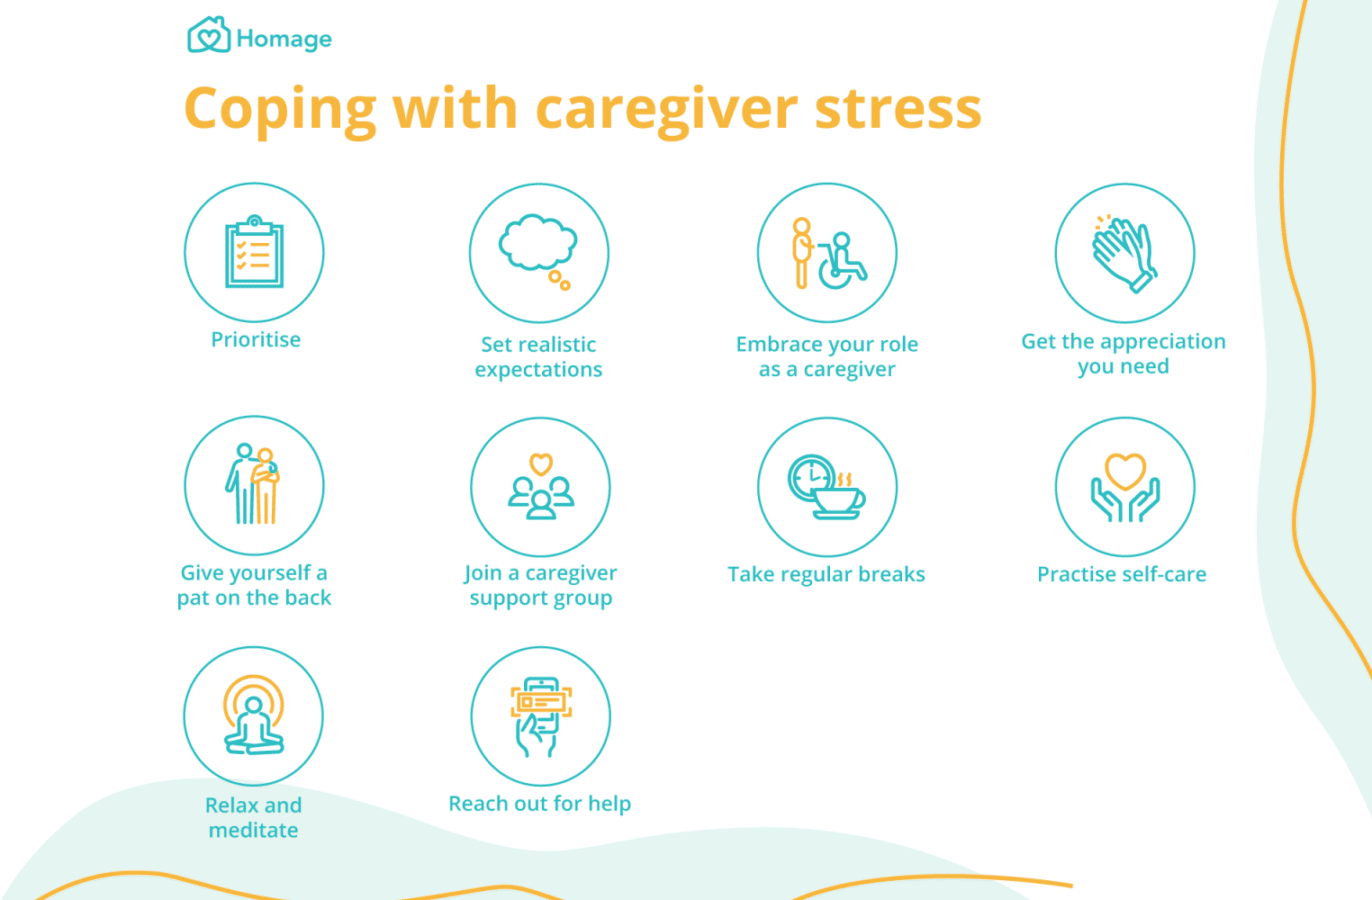 Learning to manage or prevent caregiver burnout is not always easy. However, caring for your own wellbeing is necessary to ensure that you are better able to care for your loved ones.